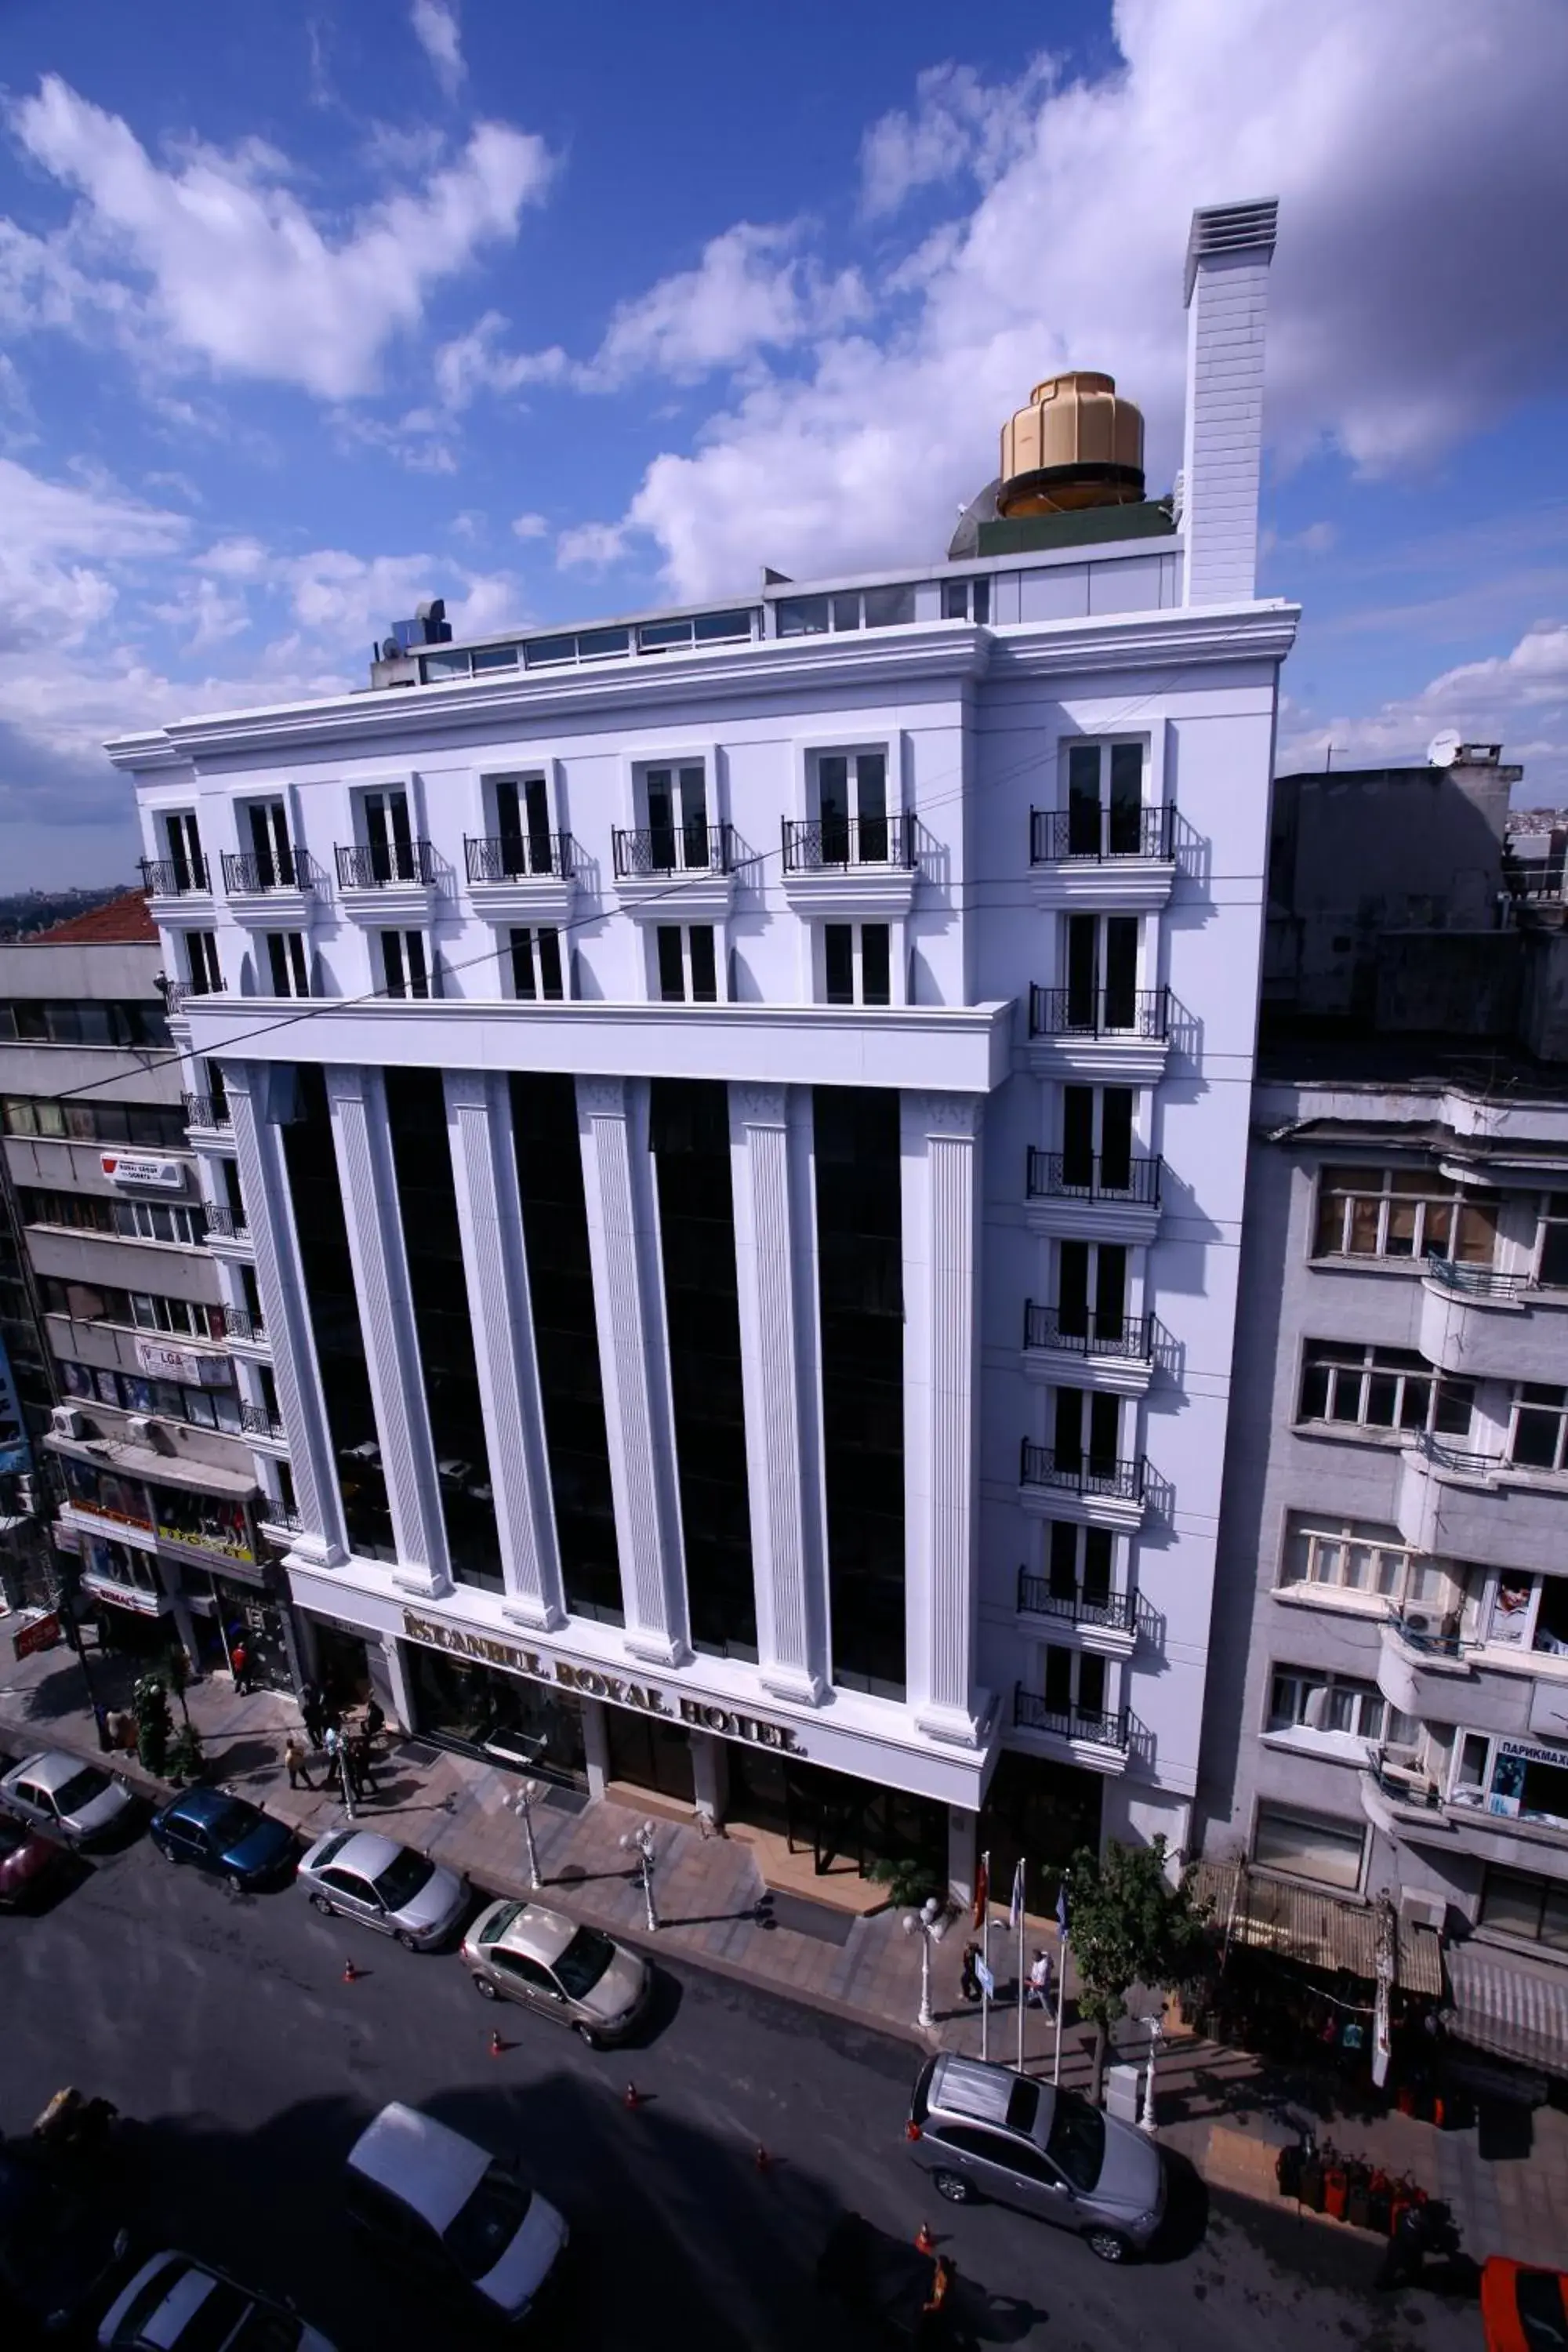 Facade/entrance, Property Building in Istanbul Royal Hotel